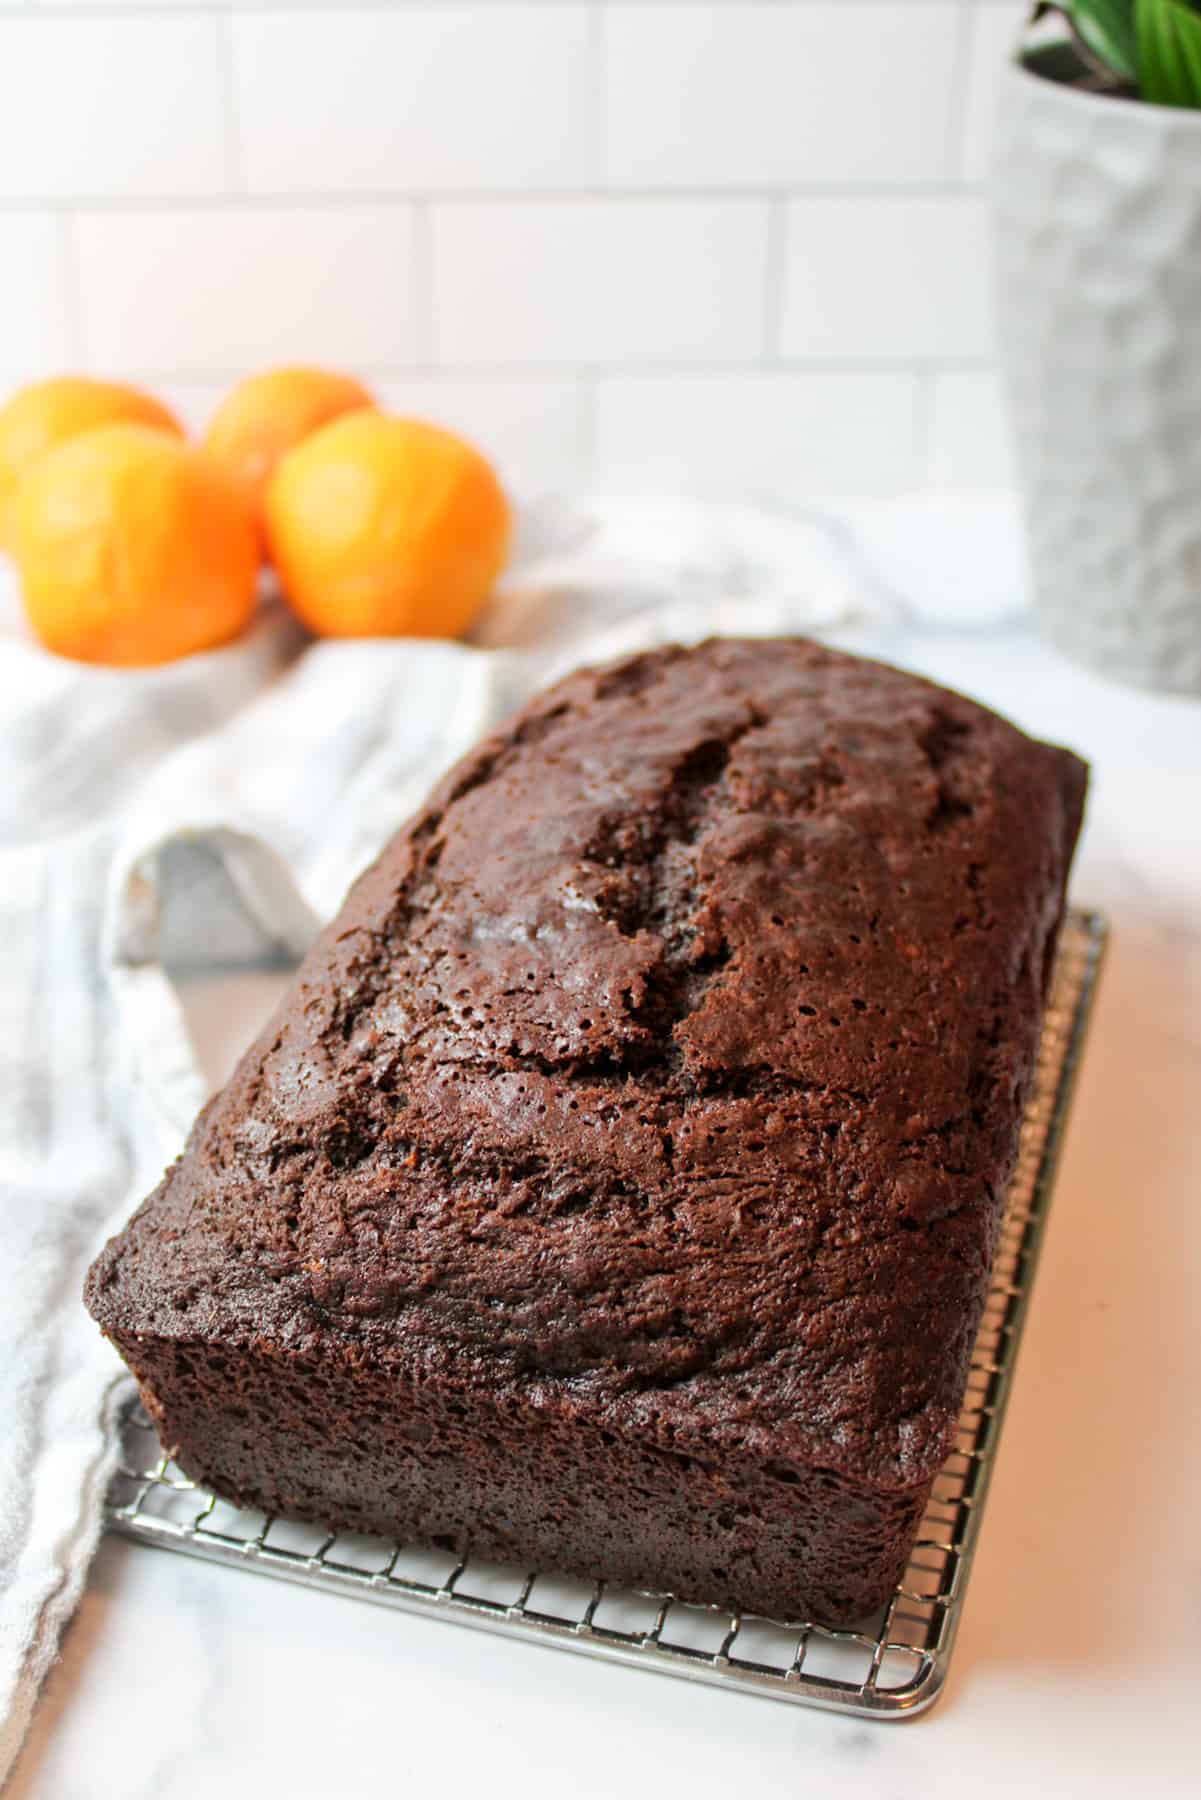 a side view of a loaf of chocoalte orange banana bread on aa iwre rack with fresh oranges in the background